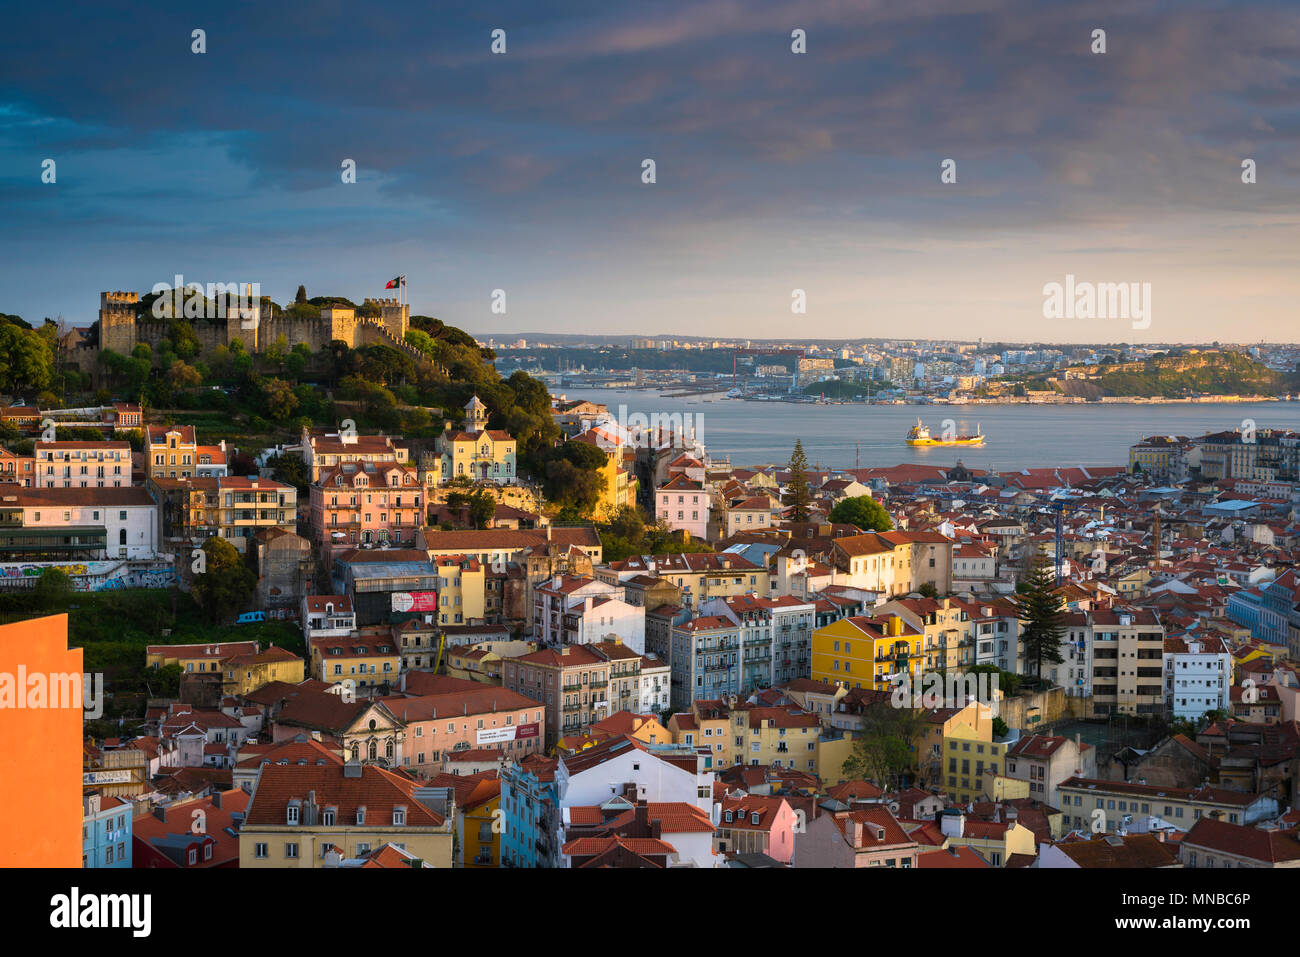 Lisbon city, view at sunset of the old town Mouraria quarter of Lisbon with the Castelo de Sao Jorge on the skyline, Portugal. Stock Photo